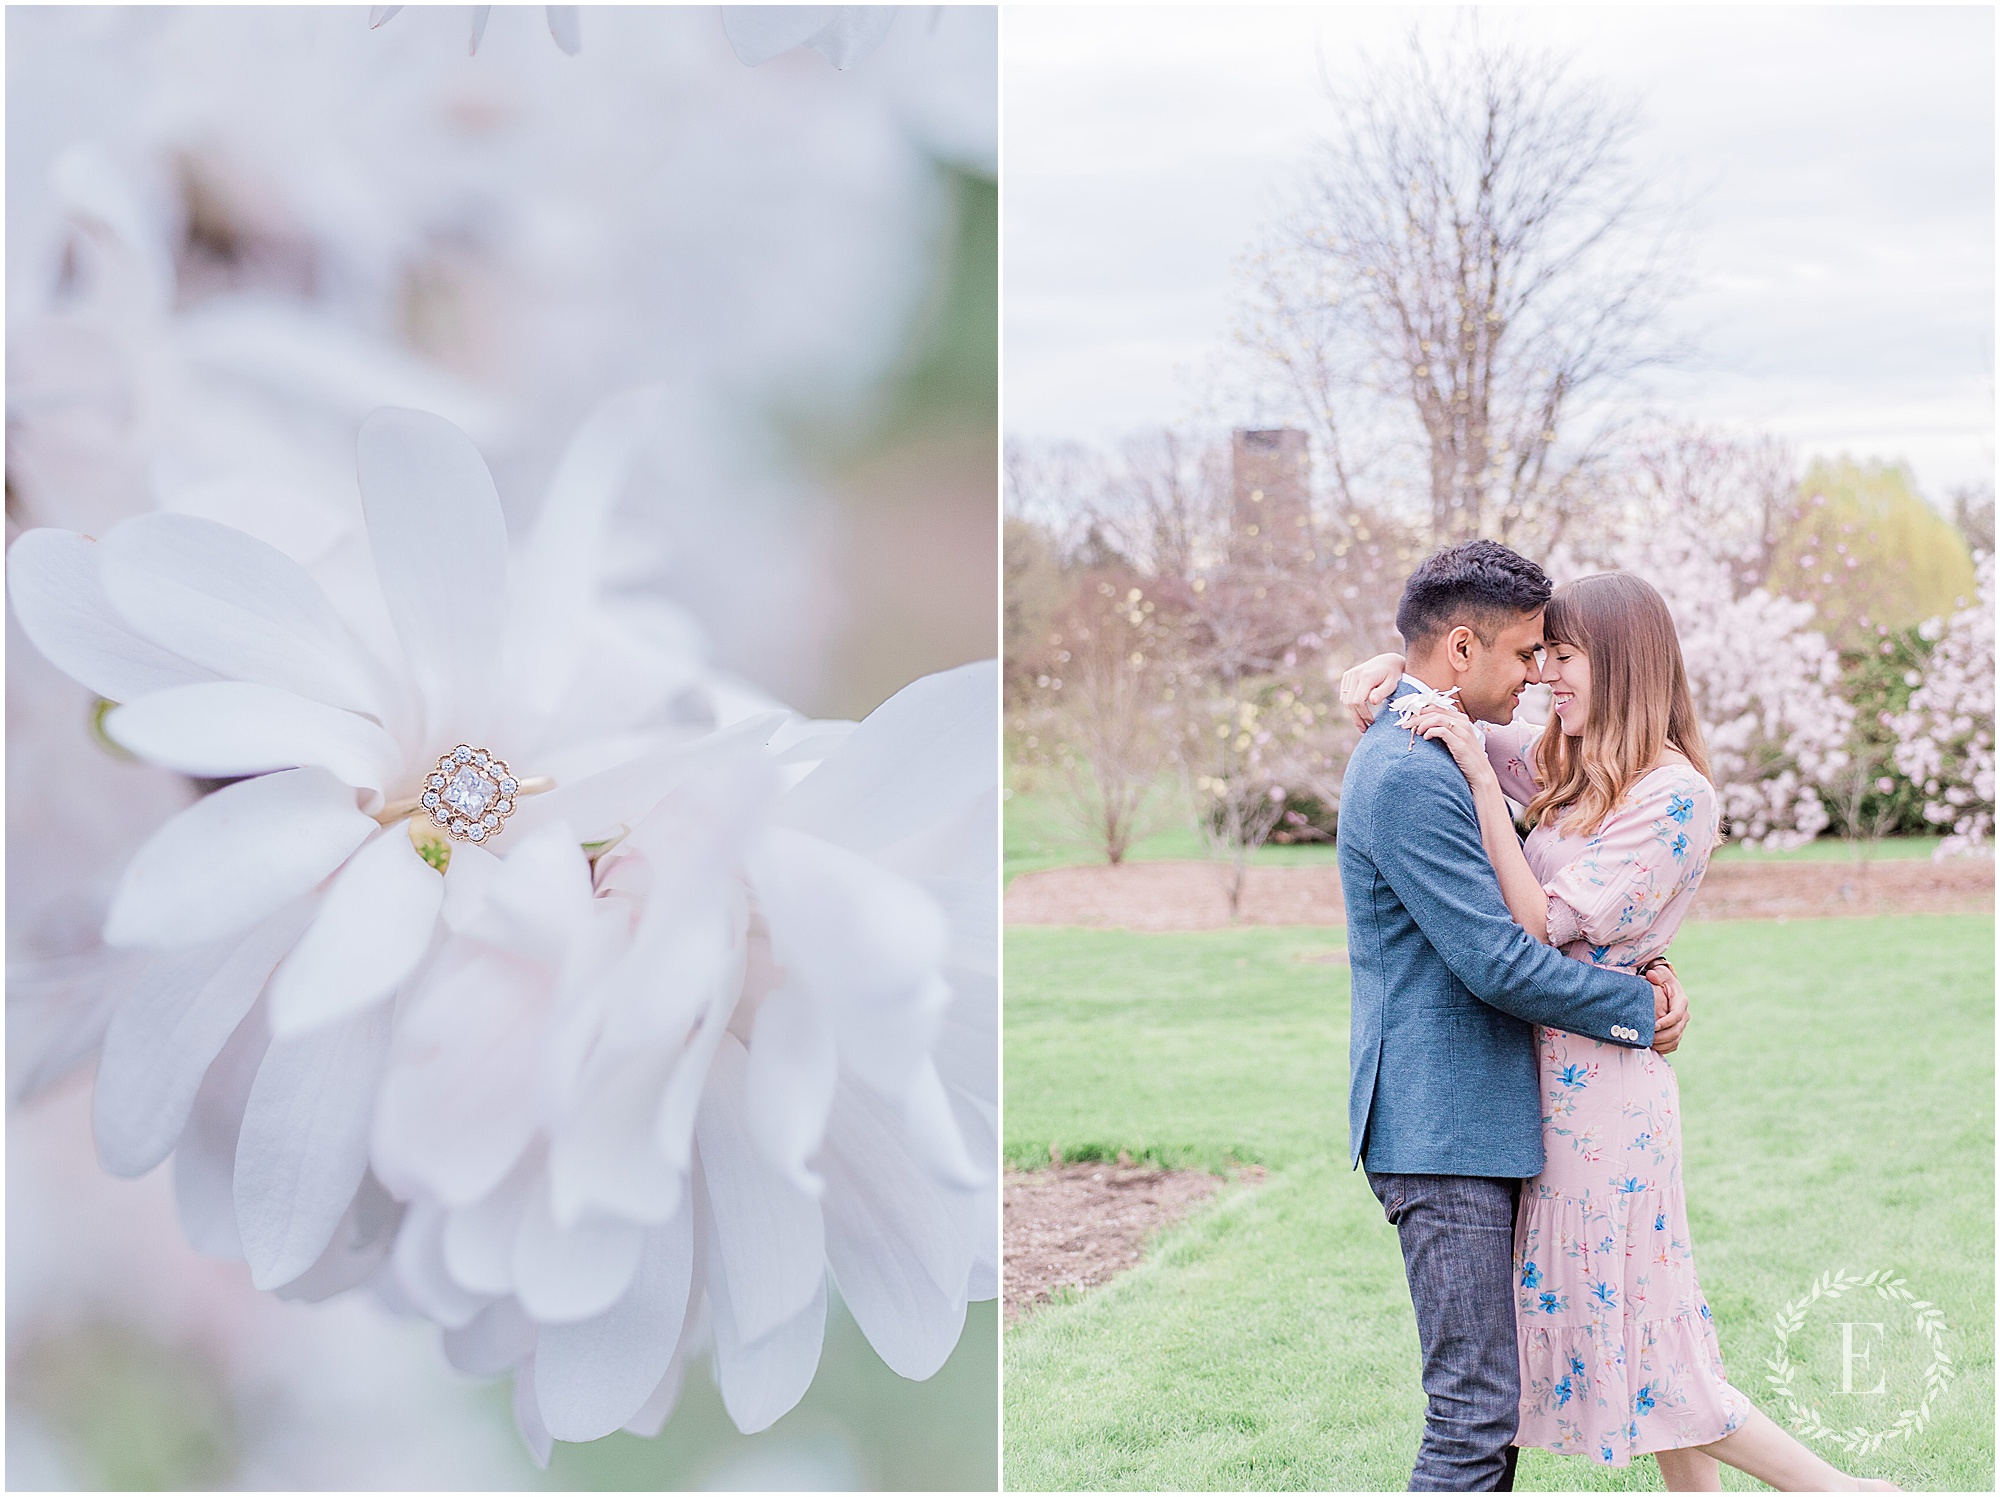 188_Cait_and_Saaqib_Engagement_at_the_Museum_of_Nature_and_Ornamental_Gardens___Photography_by_Emma.jpg